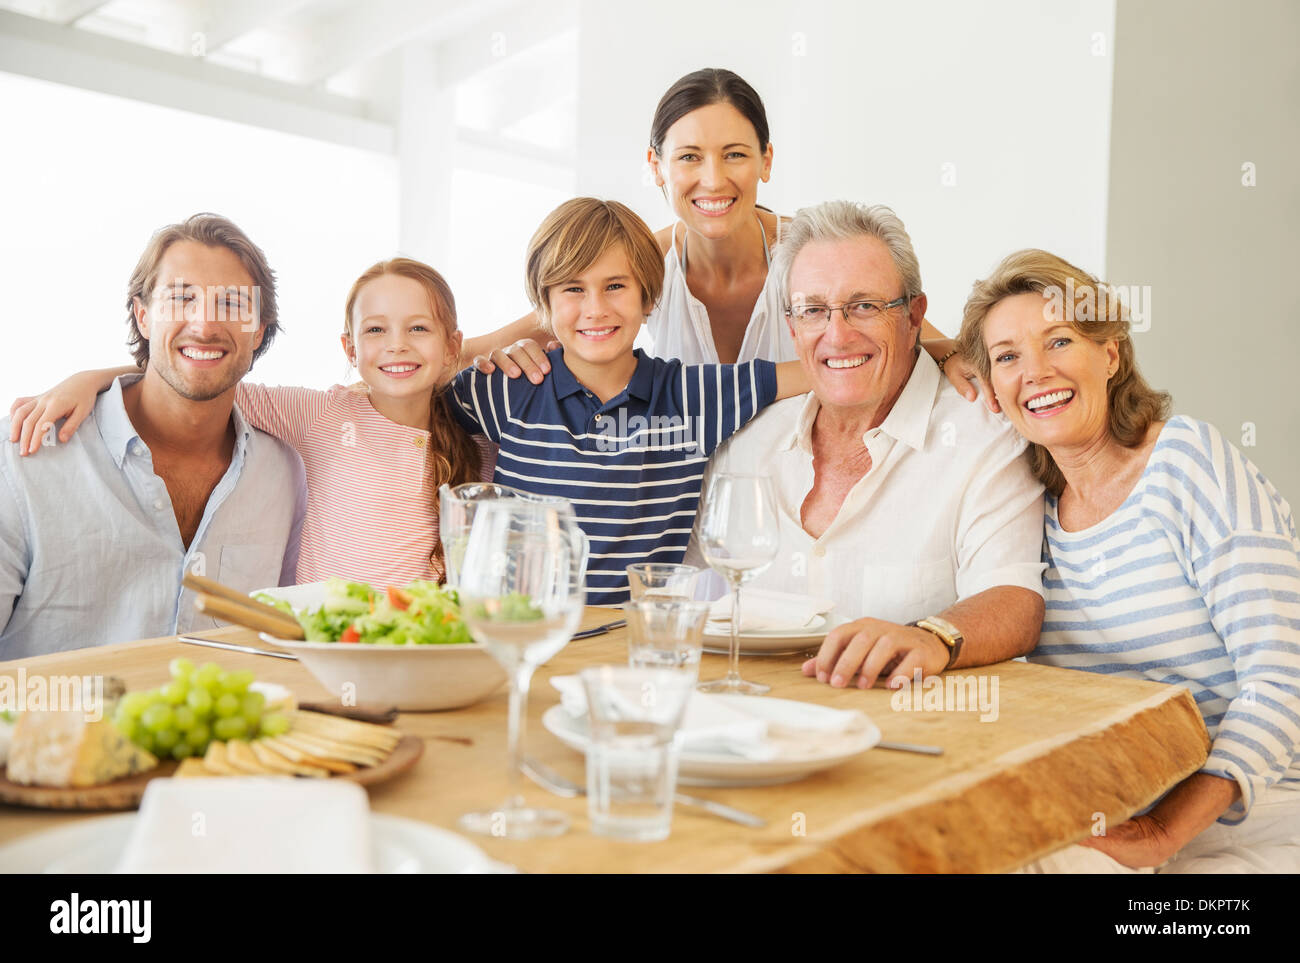 Multi-generation family smiling together at table Stock Photo